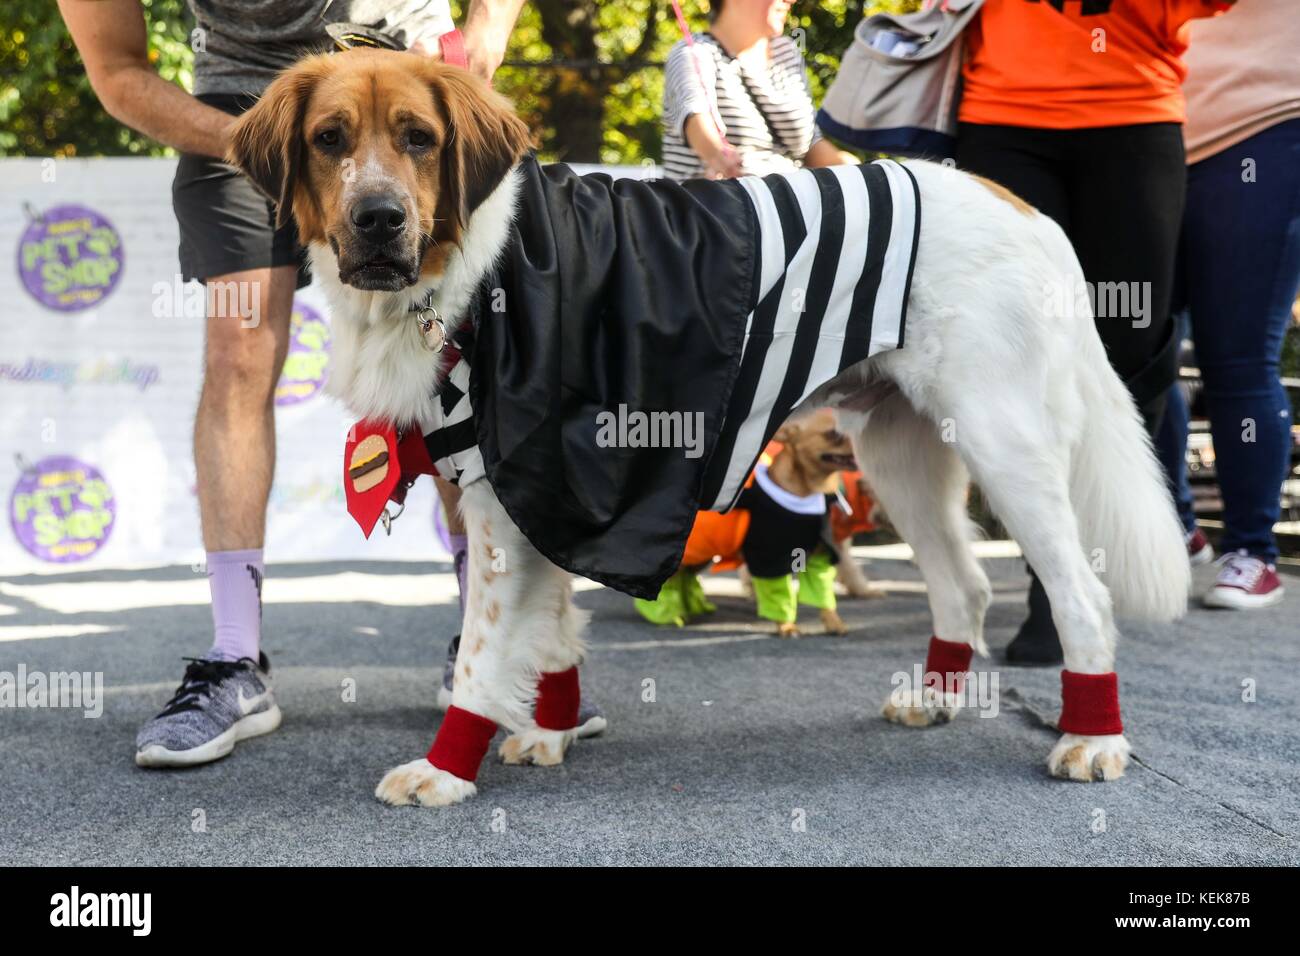 New York, United States. 21st Oct, 2017. NEW YORK, NY - OCTOBER 21: Dogs in costumes attend the 27th Annual Tompkins Square Halloween Dog Parade in Tompkins Square Park on October 21, 2017 in New York City. More than 500 animals wear costumes to what is known as one of the largest dog Halloween events in the USA. (PHOTO: WILLIAM VOLCOV/BRAZIL PHOTO PRESS) Credit: Brazil Photo Press/Alamy Live News Stock Photo